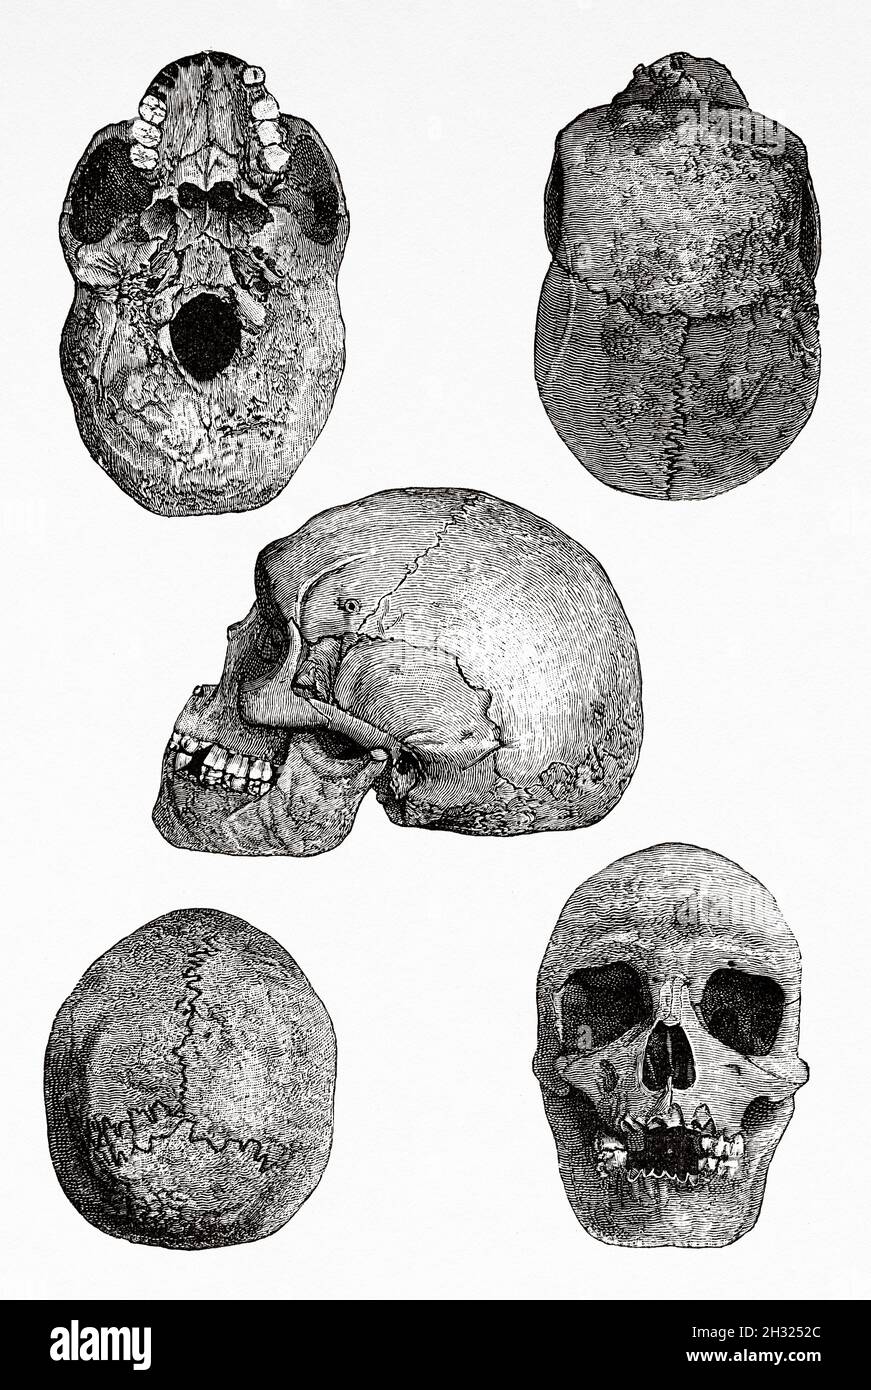 Skull of a Native Australian indigenous man from Rockhampton, central Queensland, Australia. Old 19th century engraved illustration, Journey to Northeast Australia by Carl Lumholtz 1880-1884 from Le Tour du Monde 1889 Stock Photo